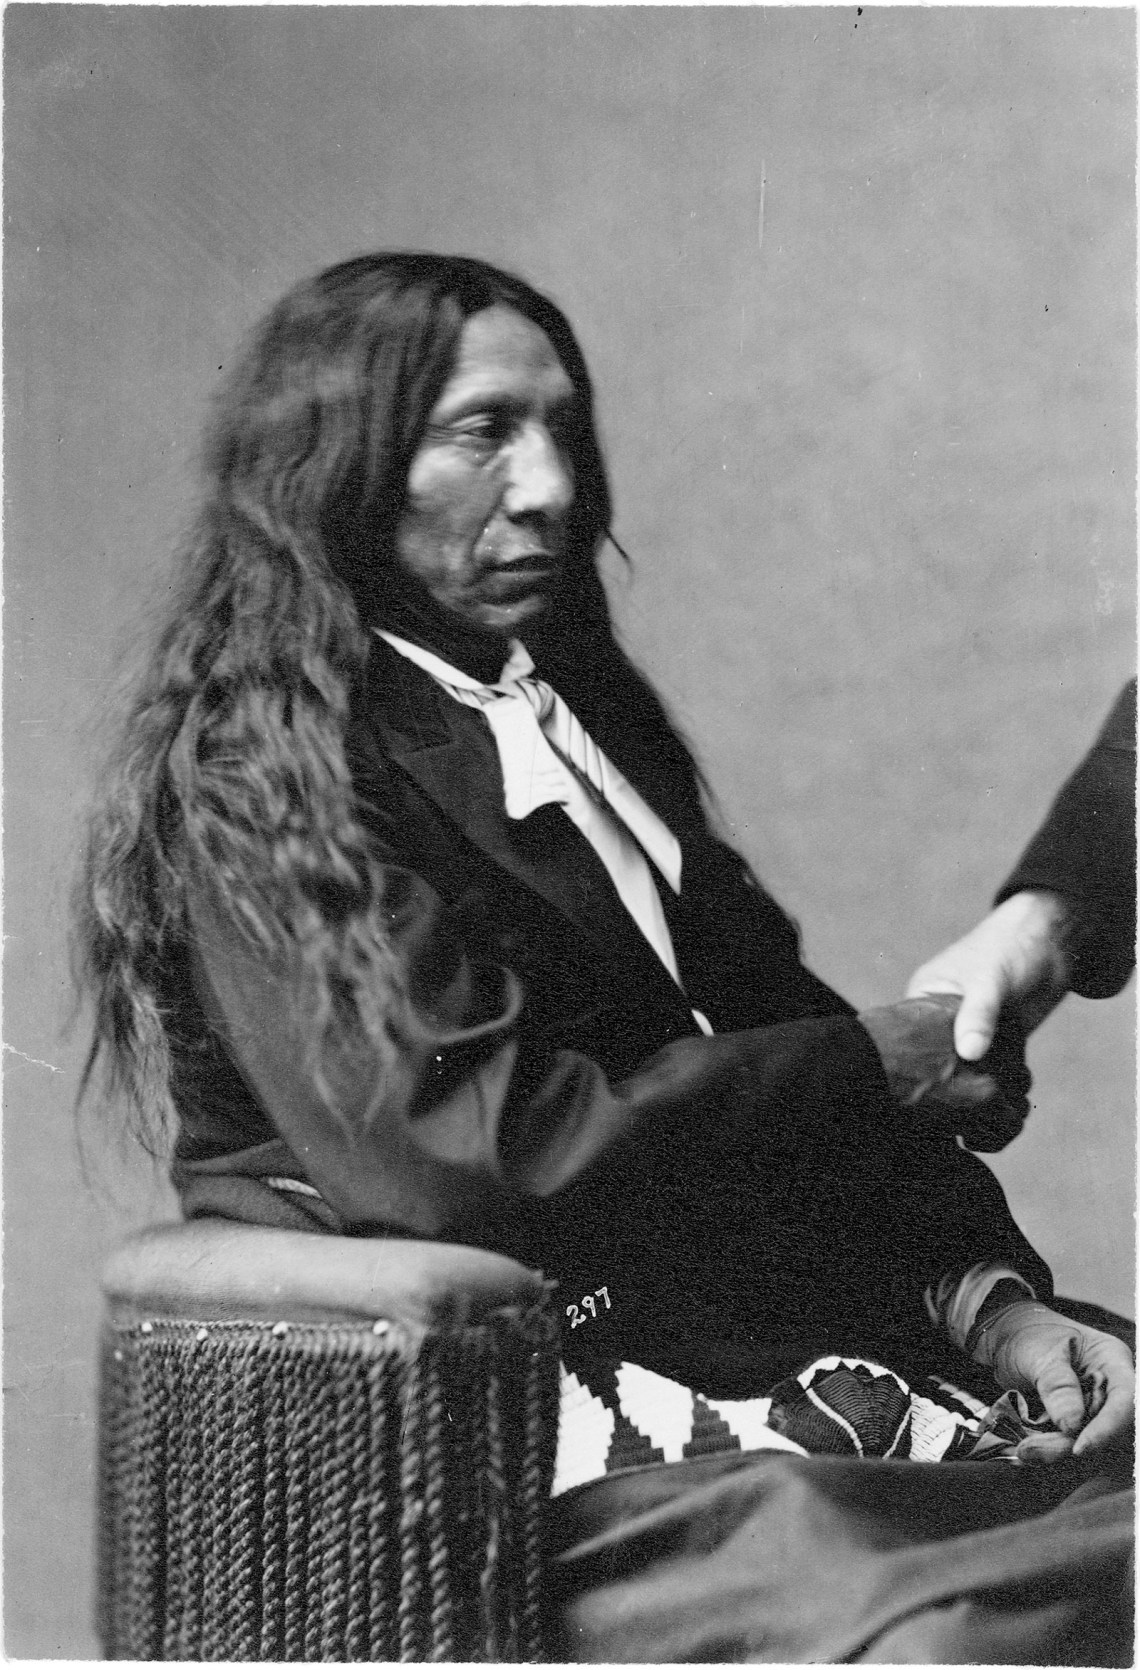 Oglala Lakota Chief Red Cloud in a formal portrait arranged by William Blackmore, whose hand is visible at right